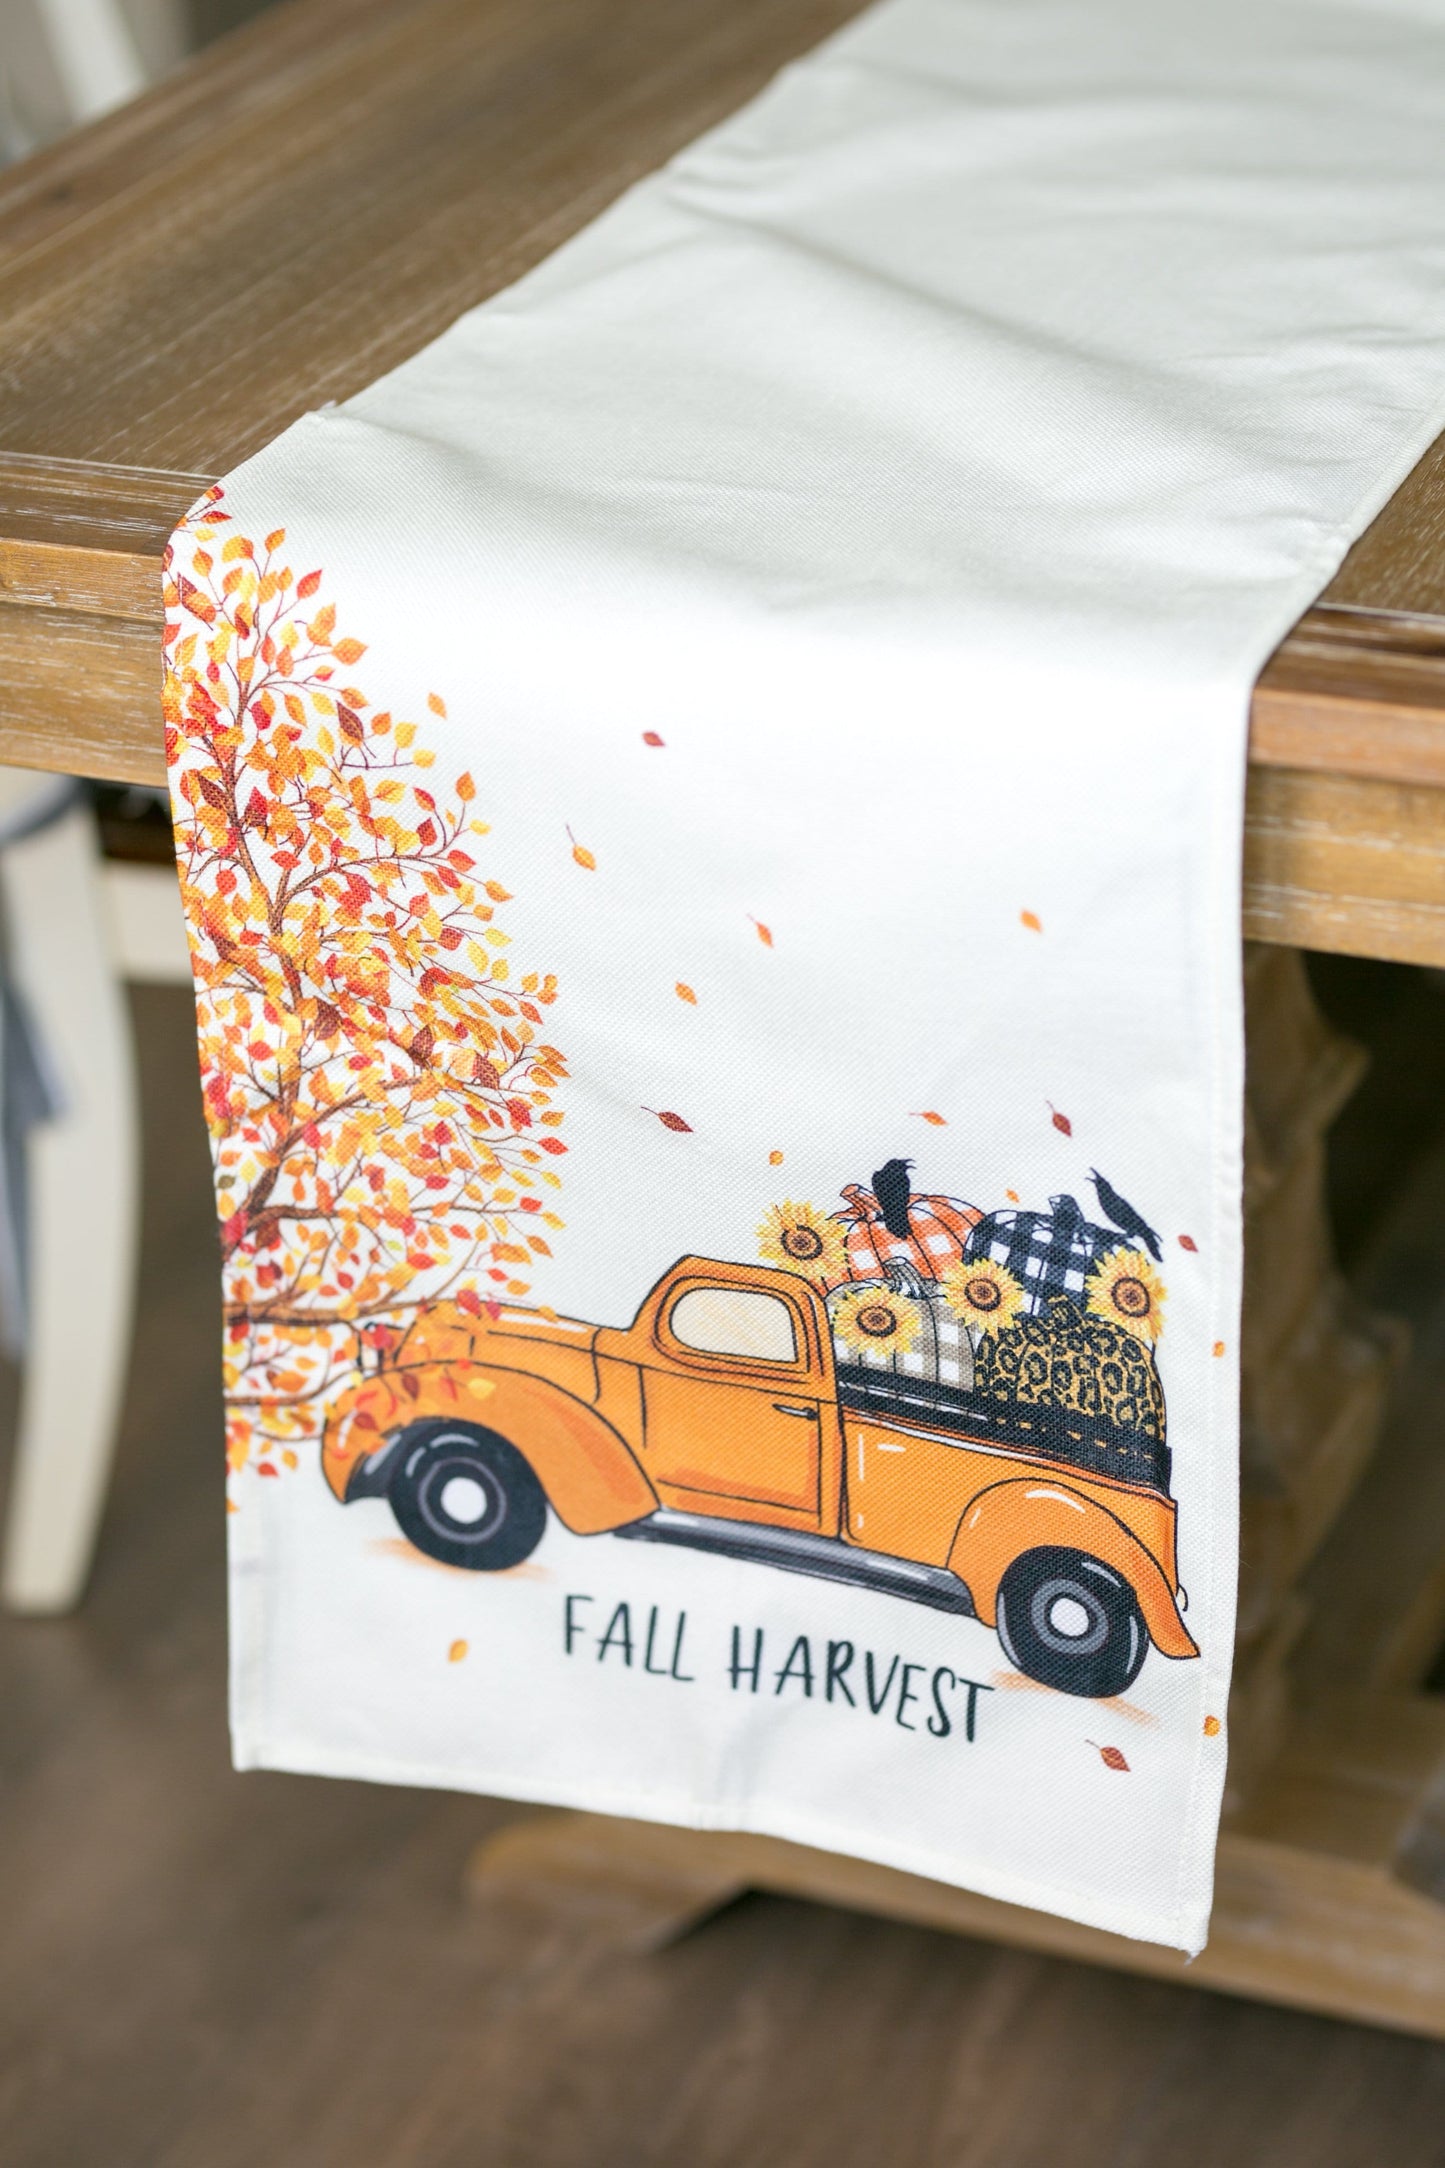 Fall Table Runners - Table Runners